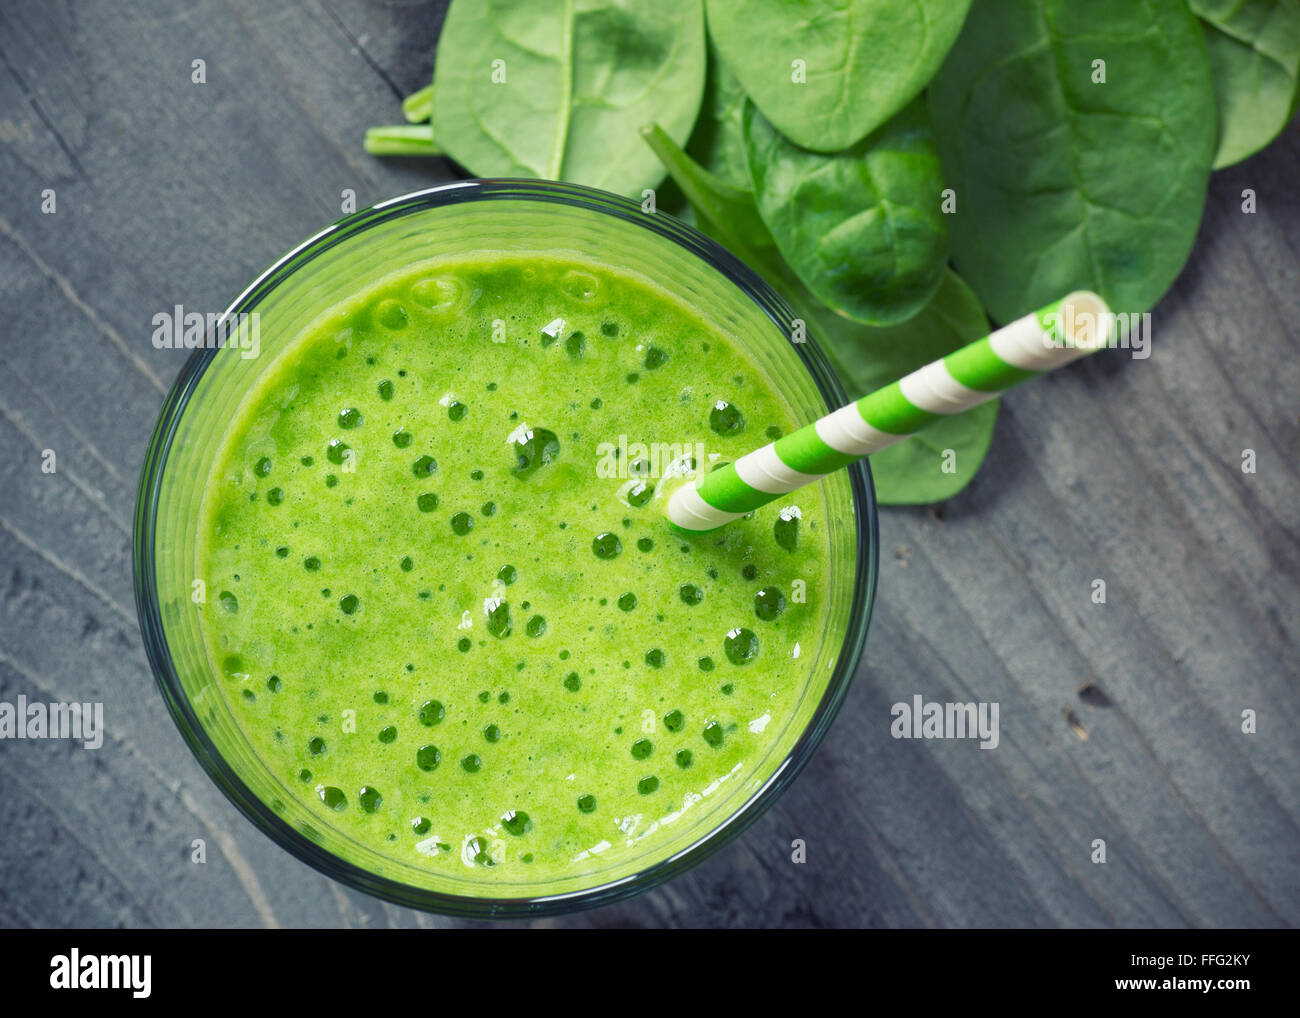 Spinach smoothie Stock Photo